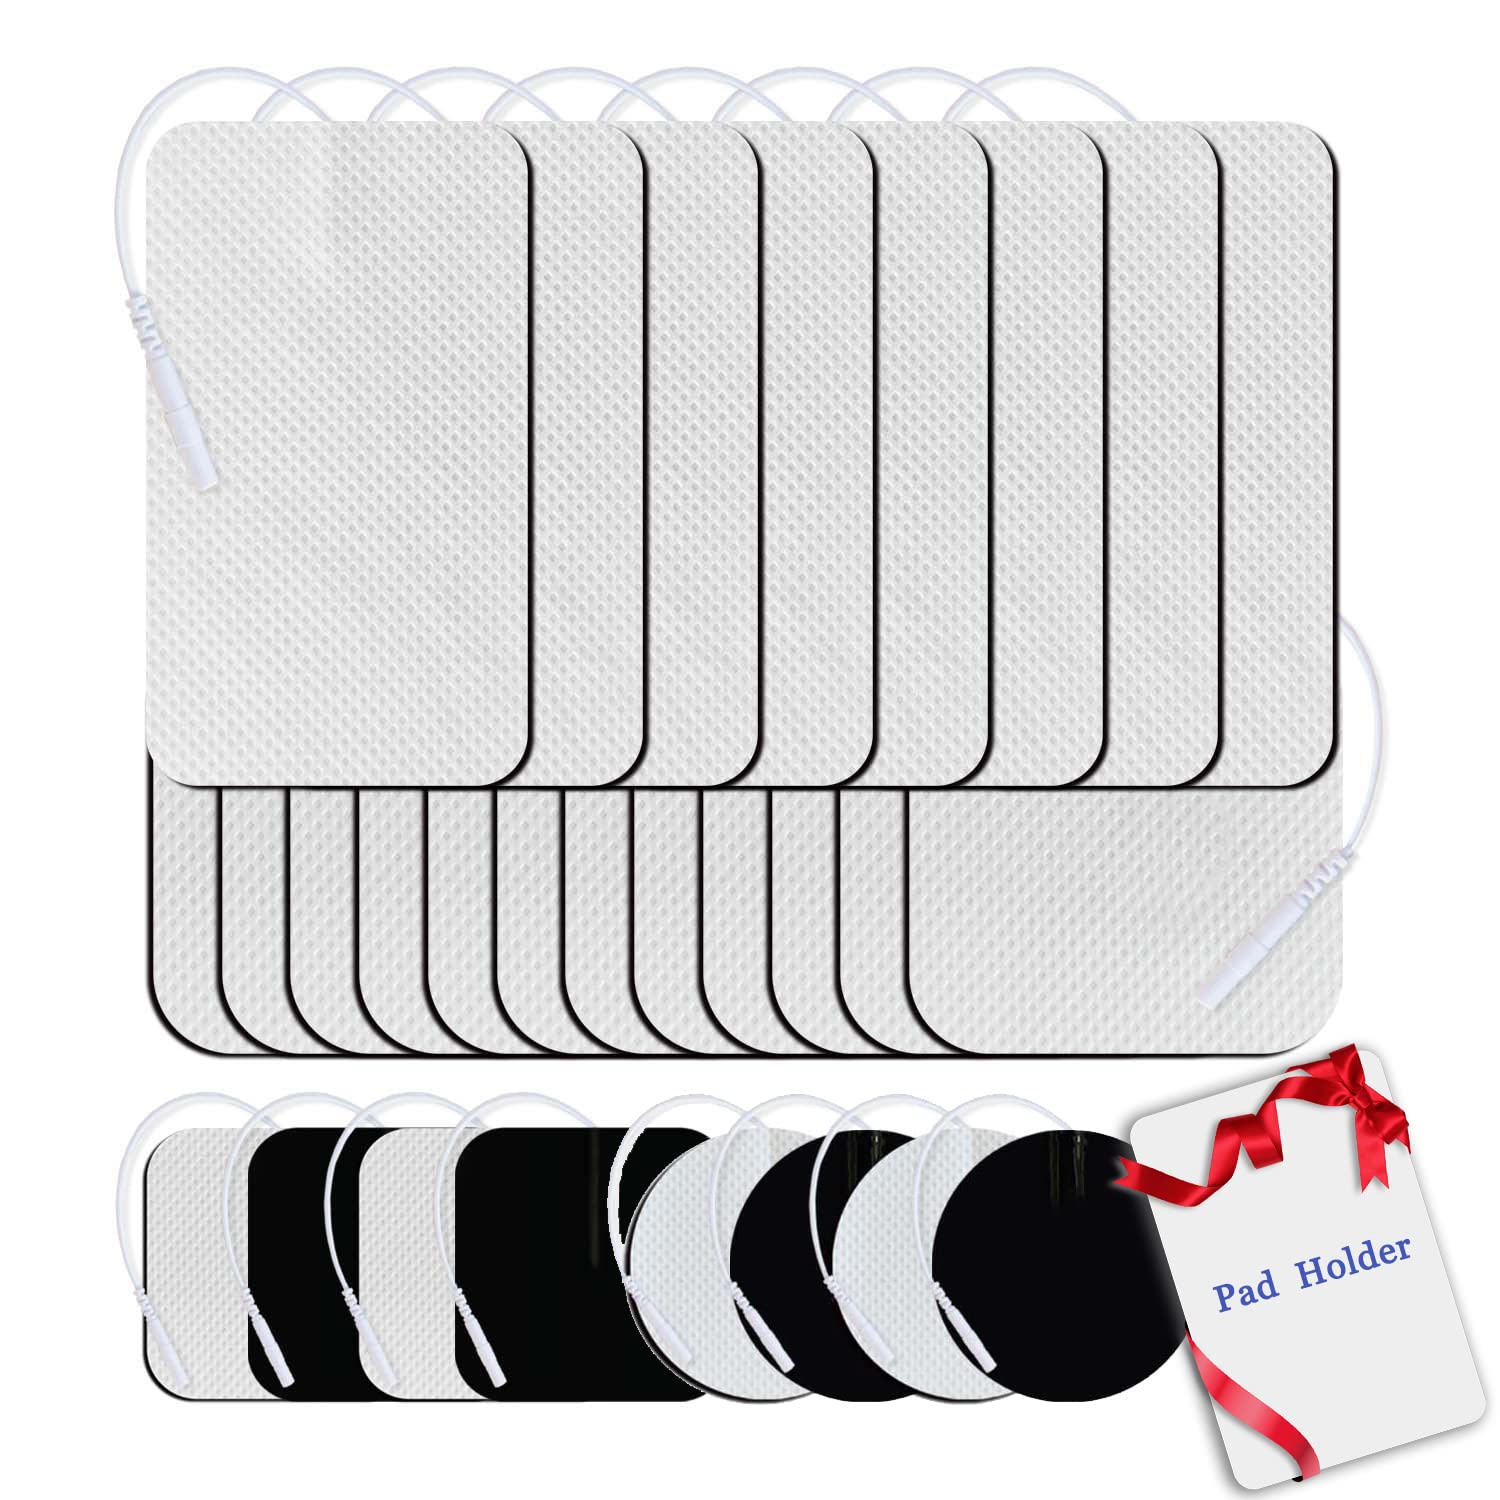 Discount TENS, EMPI Compatible TENS Electrodes, 8 Premium Replacement Pads  for EMPI TENS Units. (2 inch x 4inch)